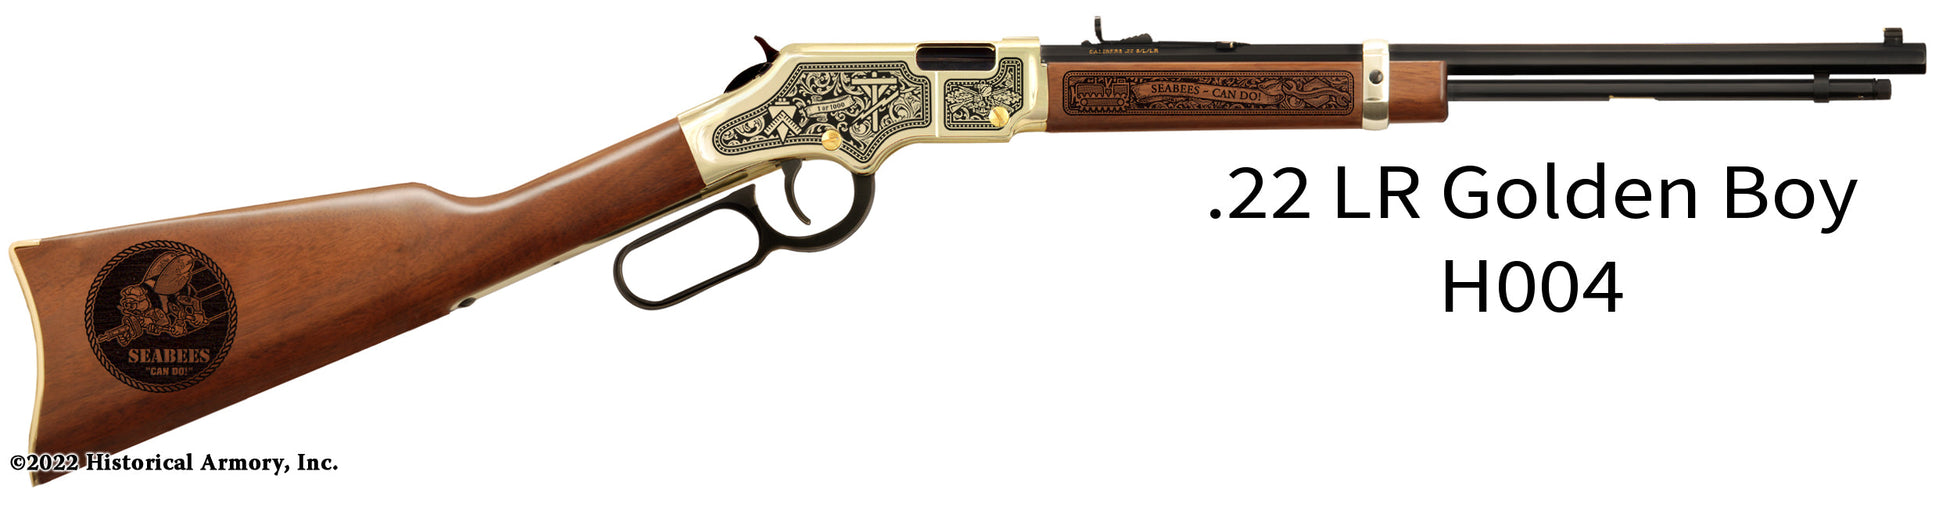 Navy Seabees Limited Edition Engraved Golden Boy Rifle